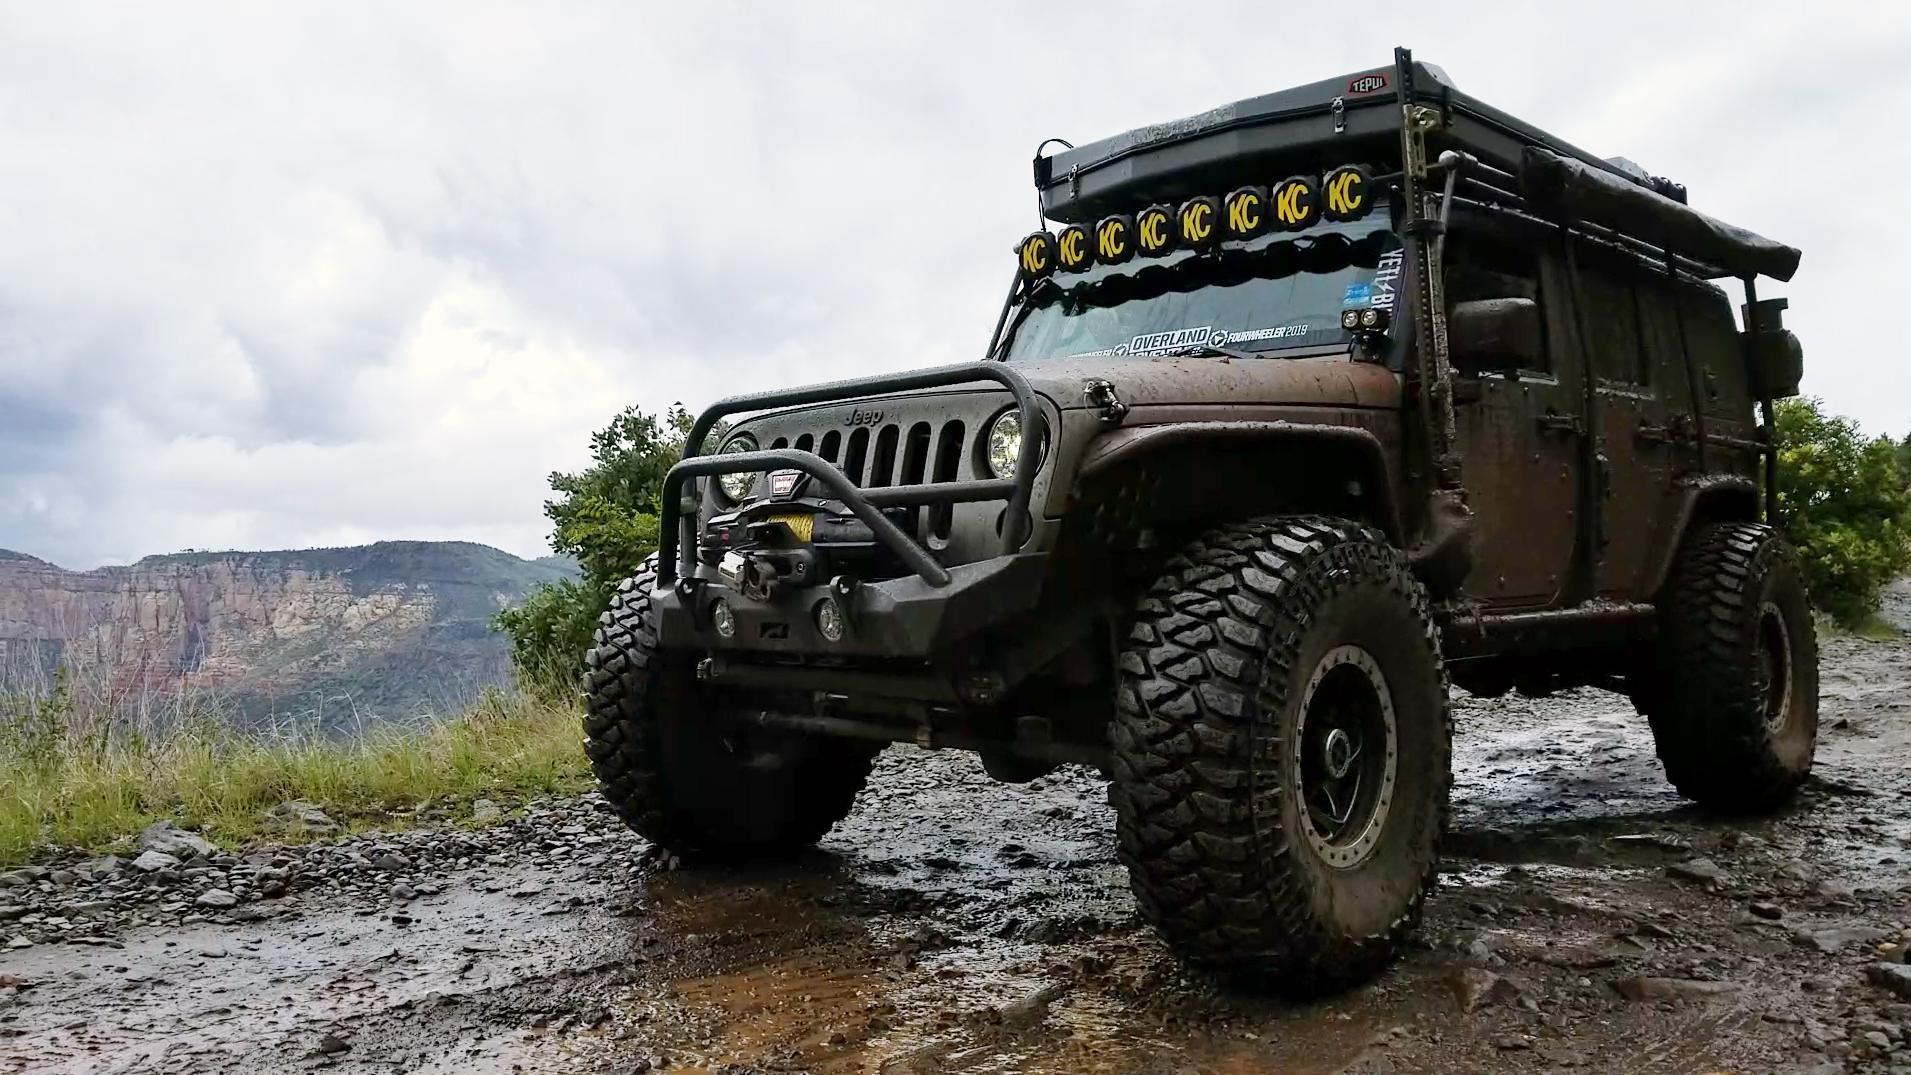 RecoilTV: Brownells ADR Overland Jeep Build | RECOIL OFFGRID